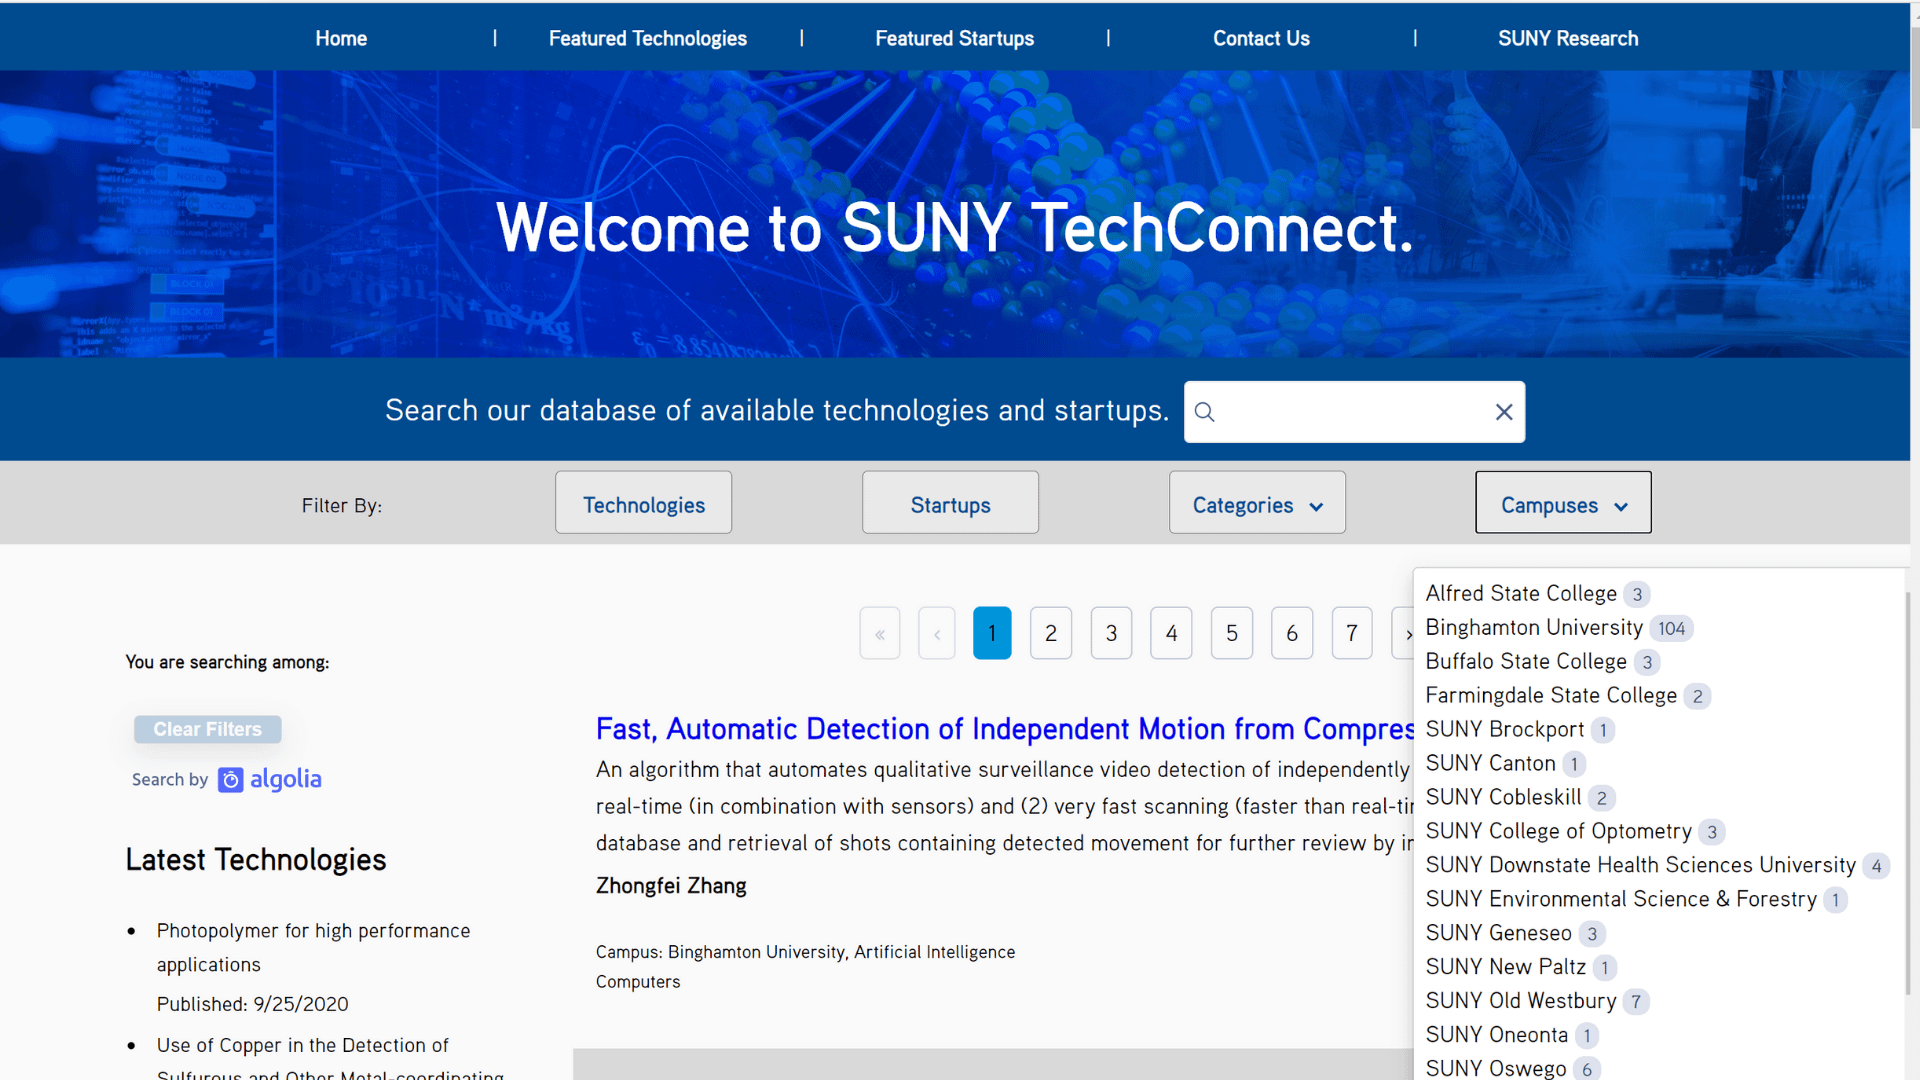 SUNY Homepage Campuses Dropdown